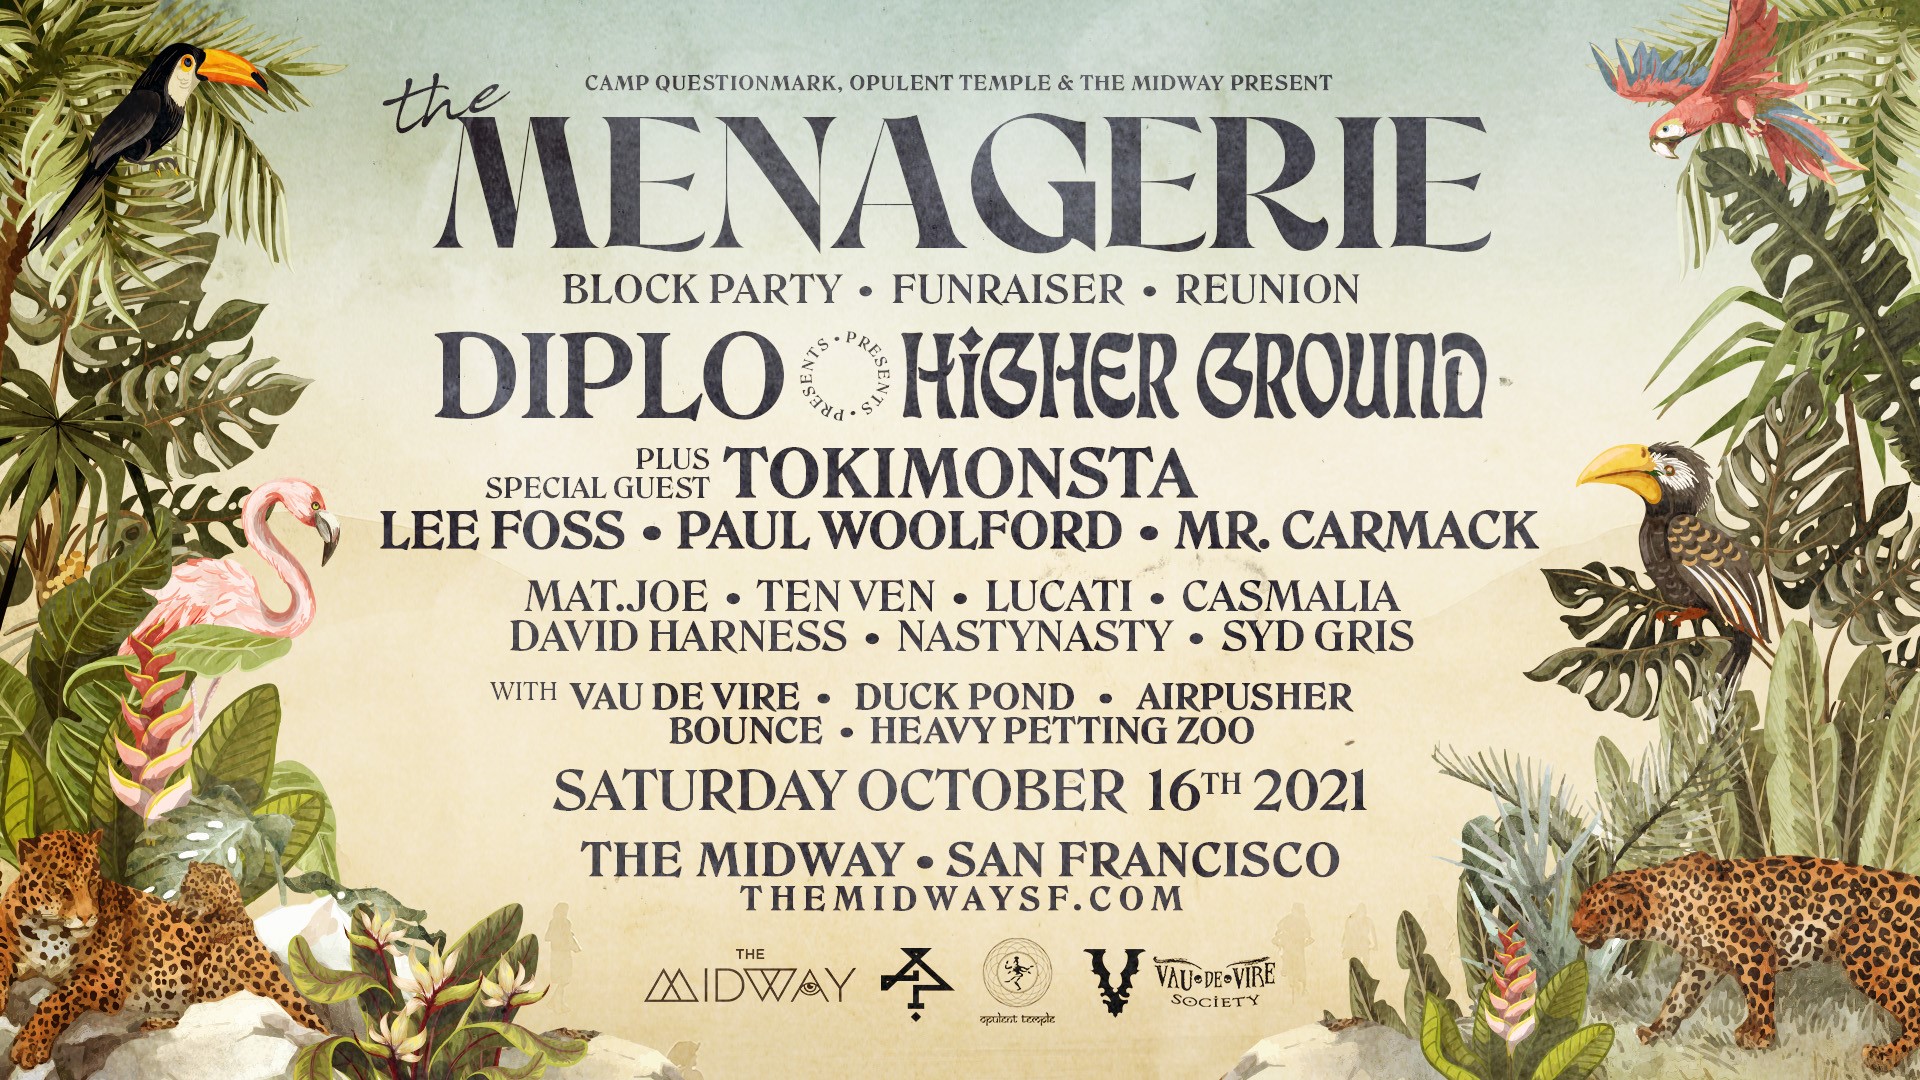 The Menagerie at The Midway ft. Diplo 2021